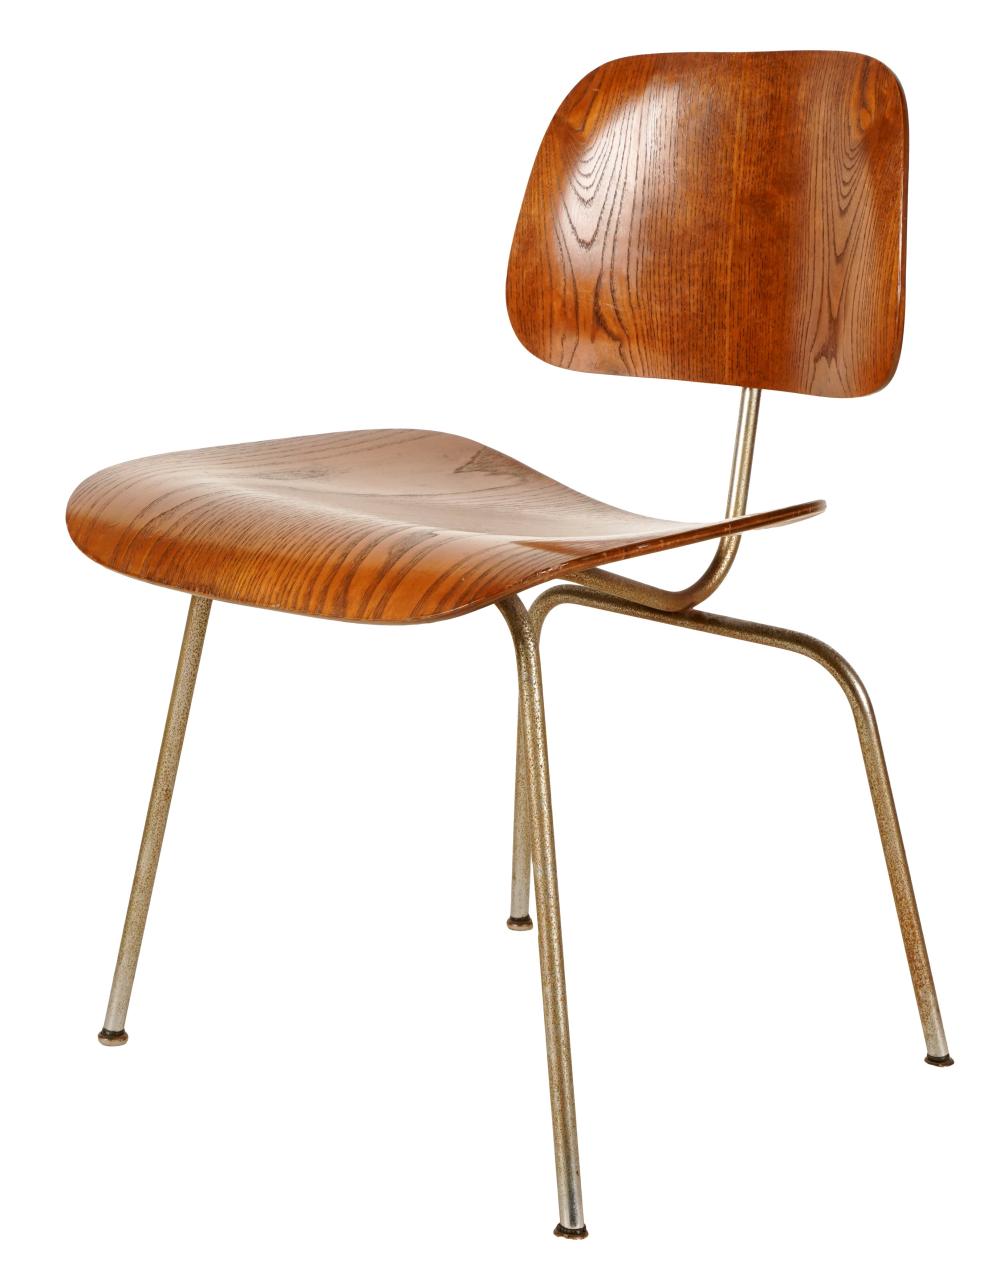 CHARLES AND RAY EAMES HERMAN 3018d8